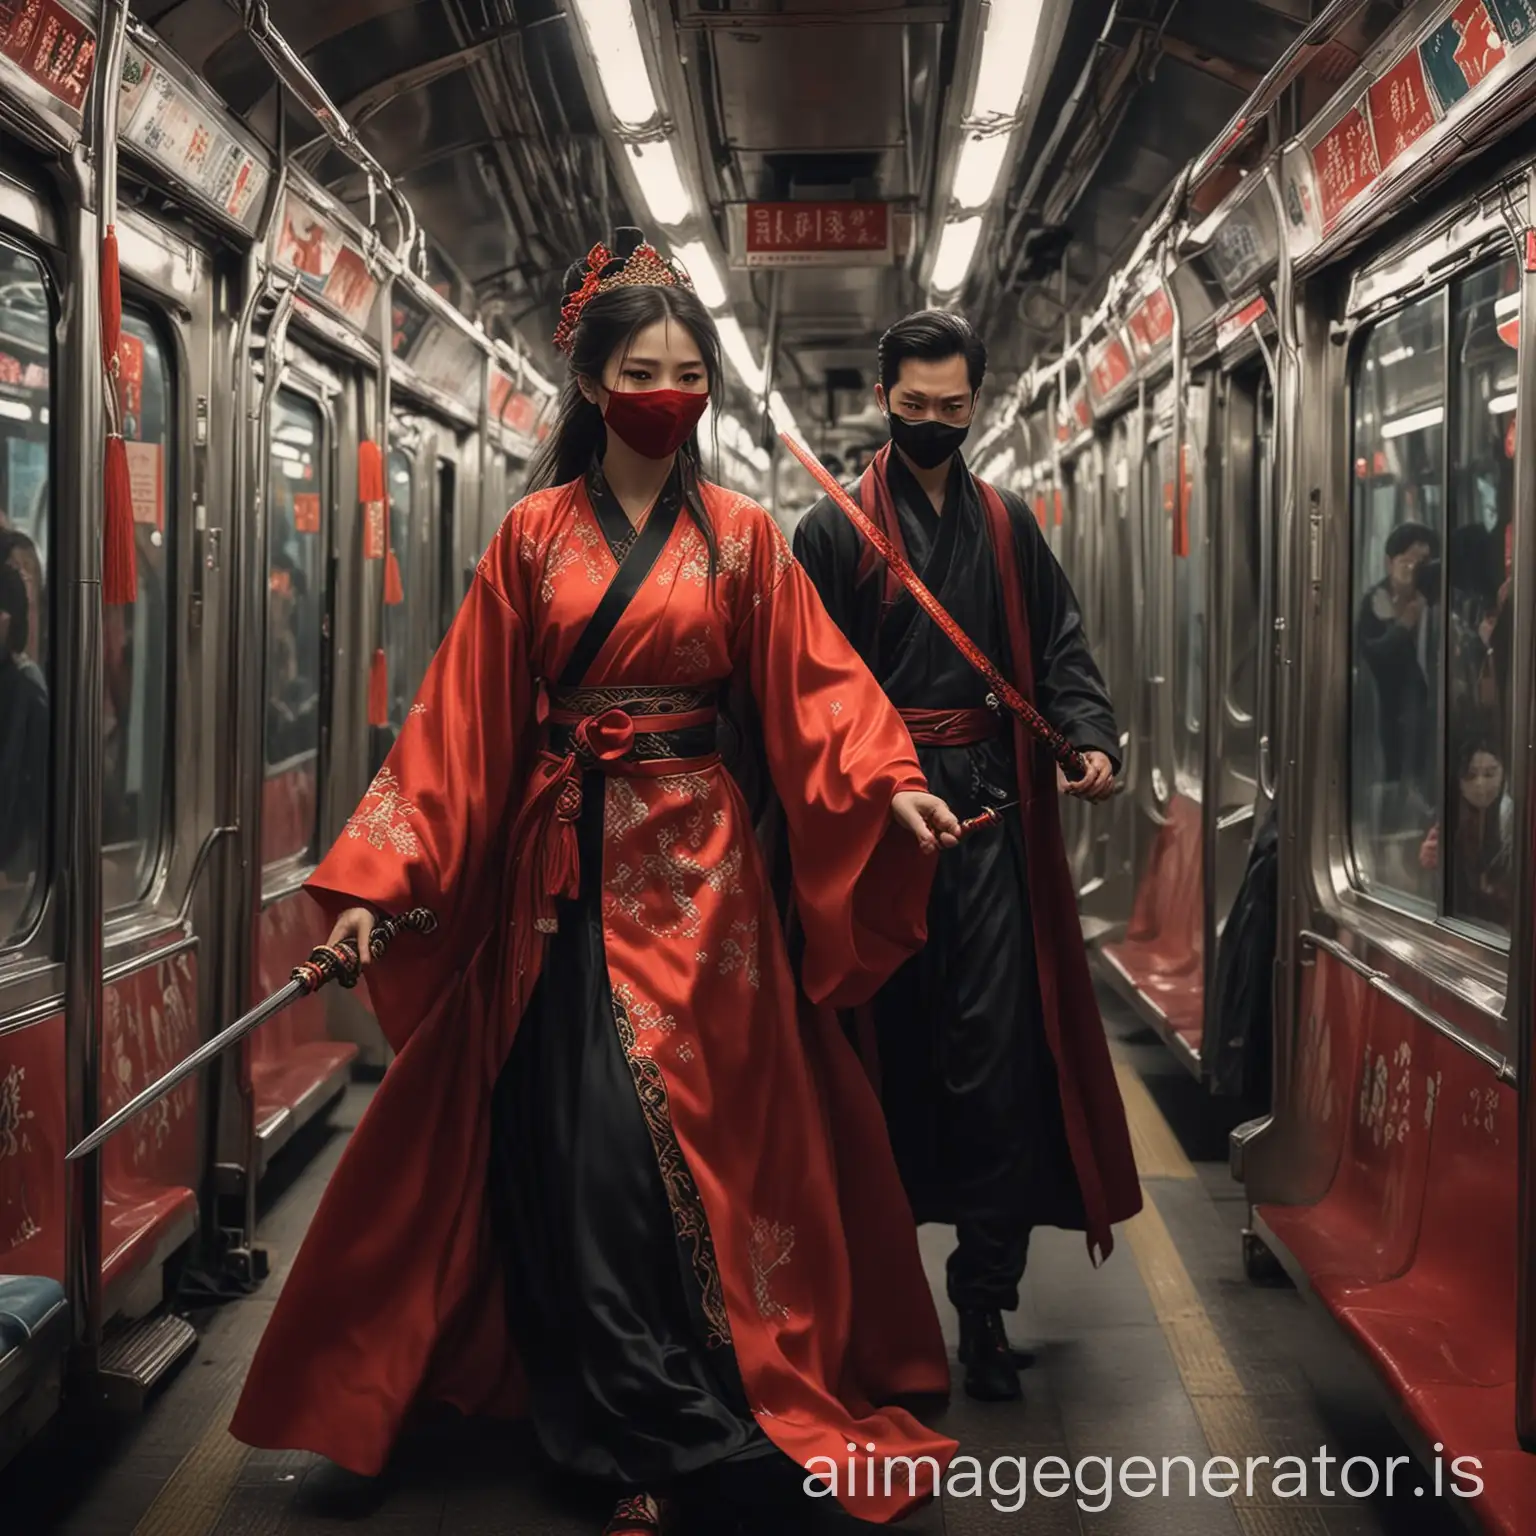 In the subway car, a princess in a red Chinese traditional costume is looking anxiously as a mysterious man in a black cloak with a mask and holding a shining sword is chasing her. Please generate this poster with both the princess and the mysterious man in the subway car.